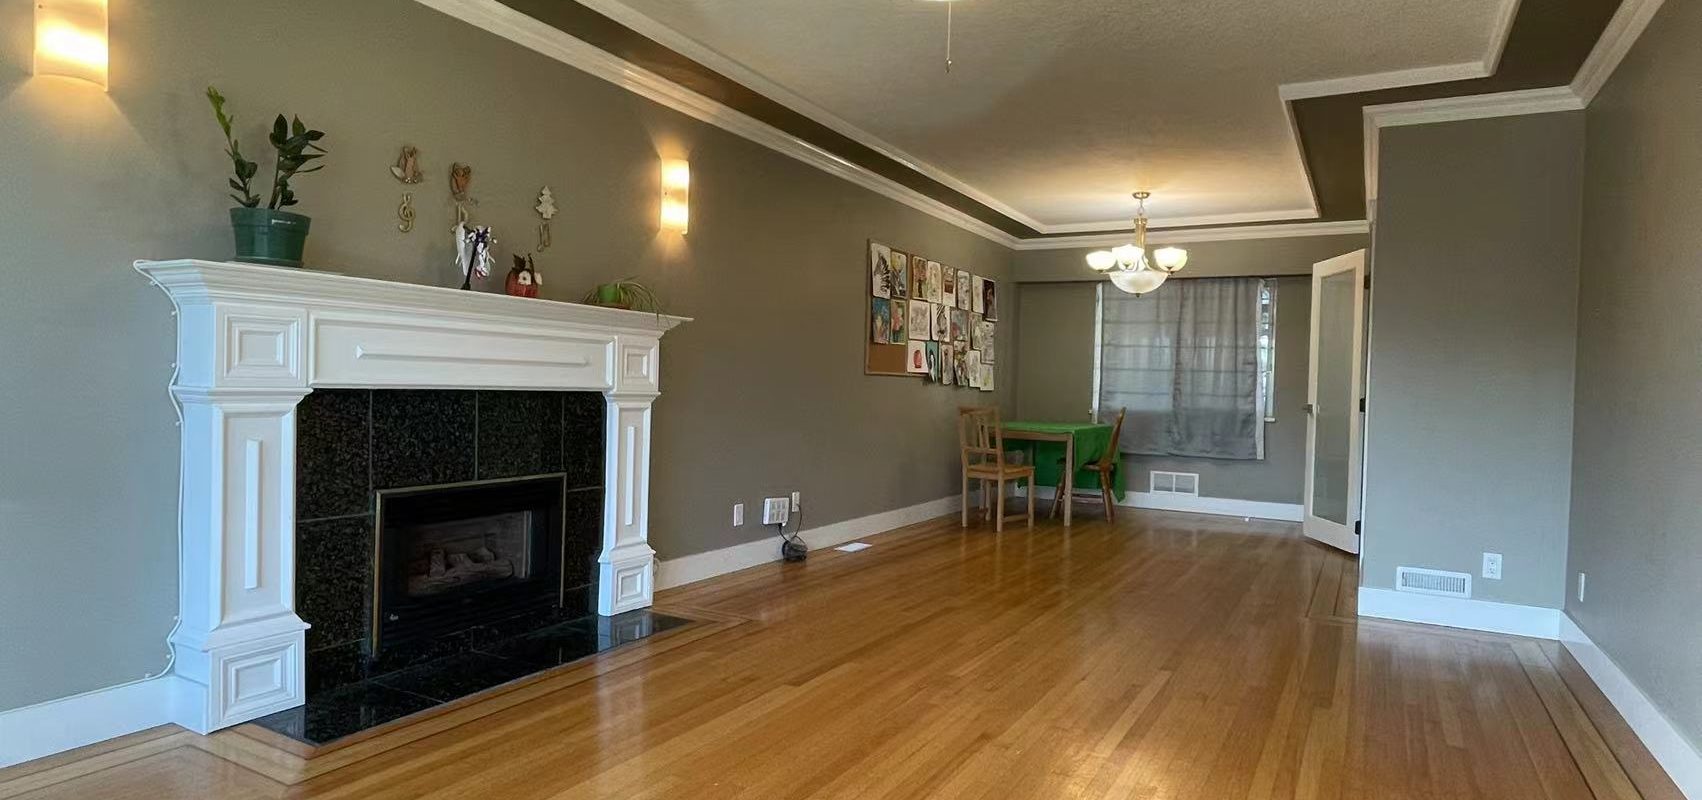 [Burnaby] Lovely 5br&4ba House for rent with huge Lawn & Space (Burnaby)